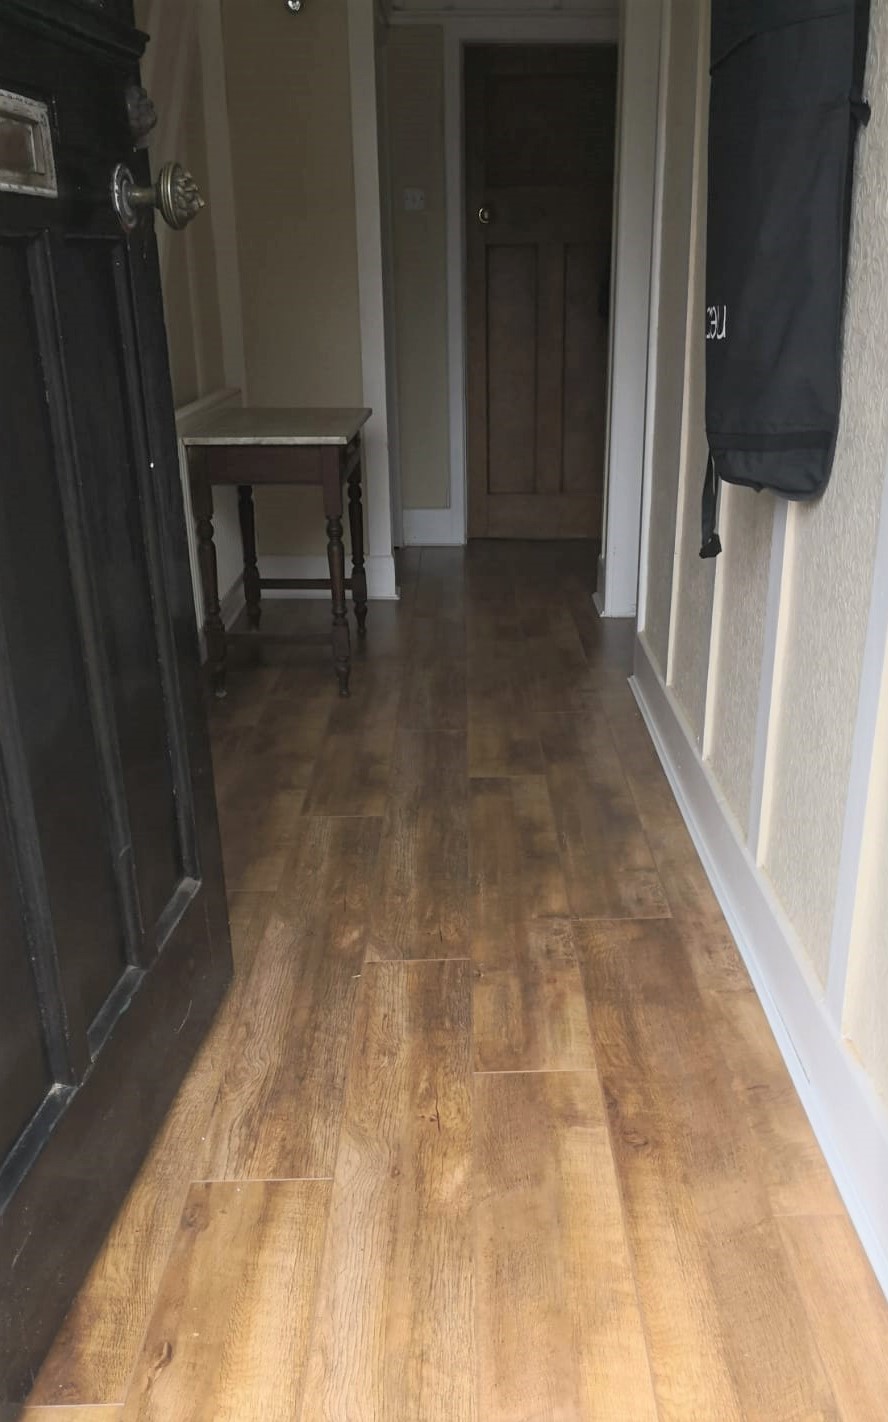 Lifestyle Floors Chelsea Country Oak Laminate Floor Installation The Carpet Shop at the Mews